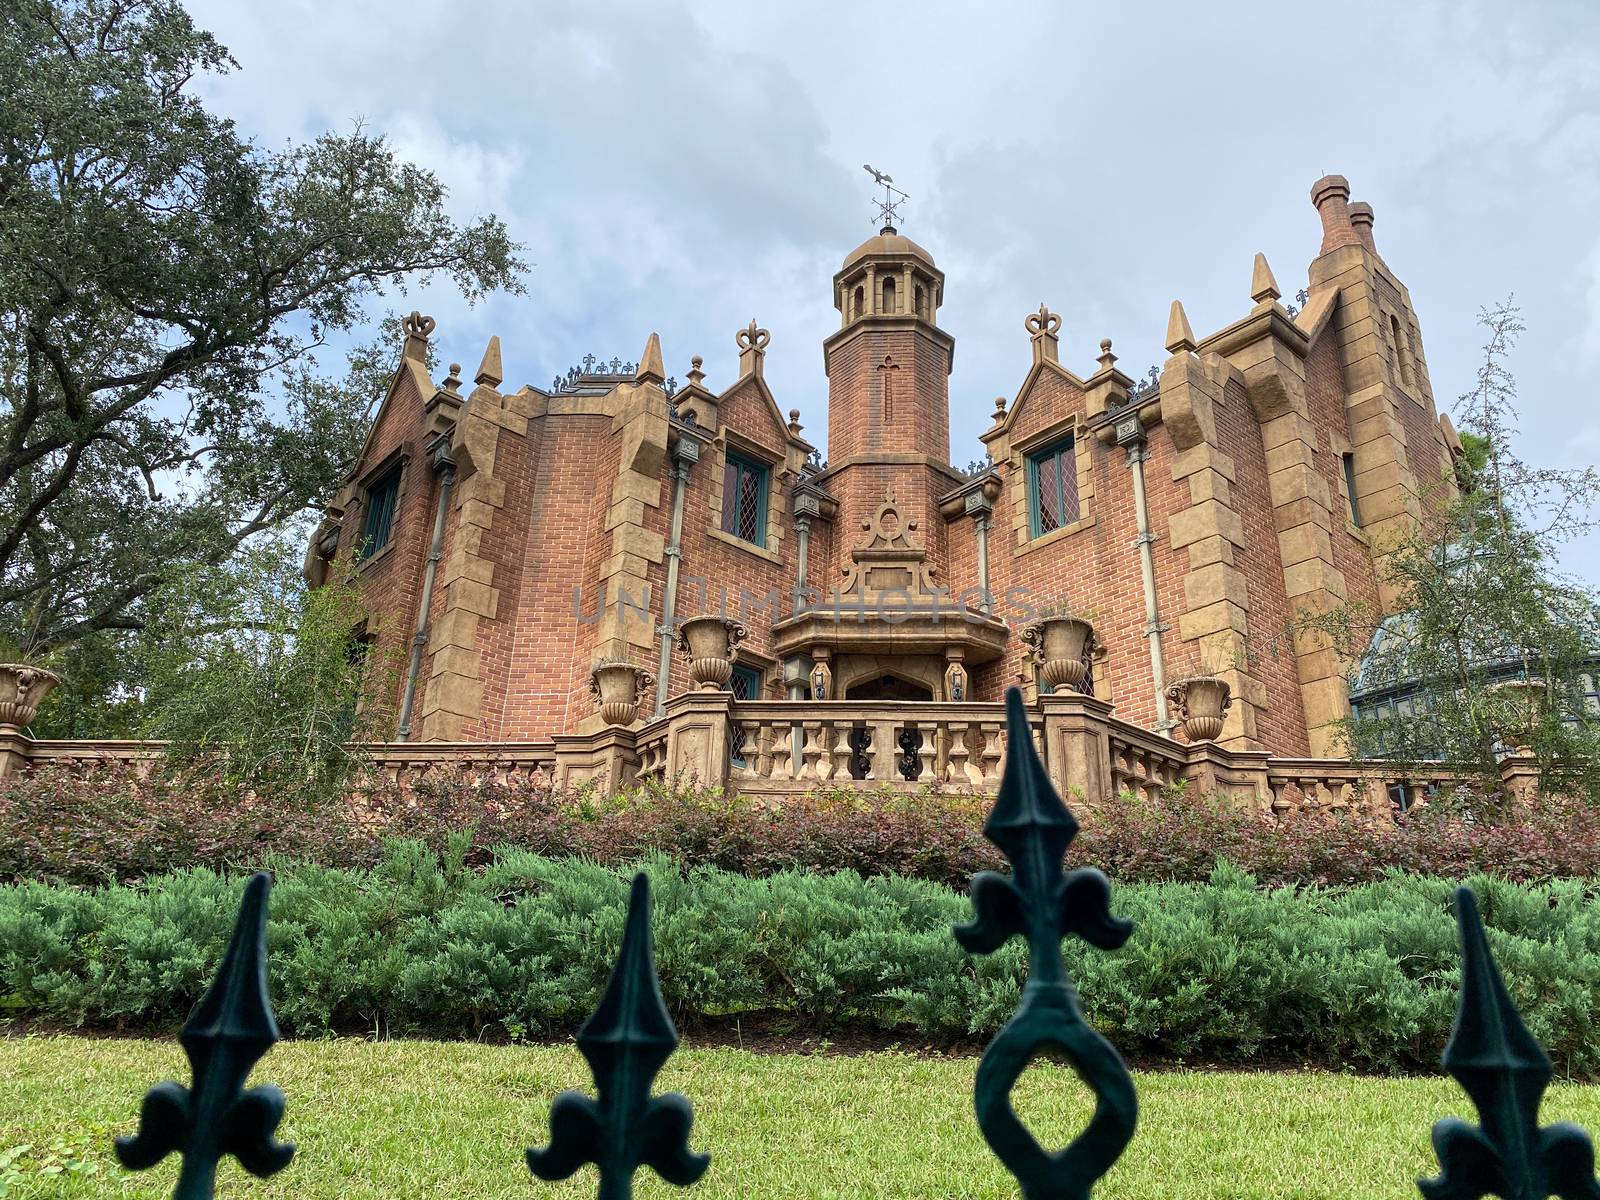 Orlando,FL/USA-10/21/20: A view of the exterior of the Haunted Mansion ride in the Magic Kingdom at  Walt Disney World Resorts in Orlando, FL.